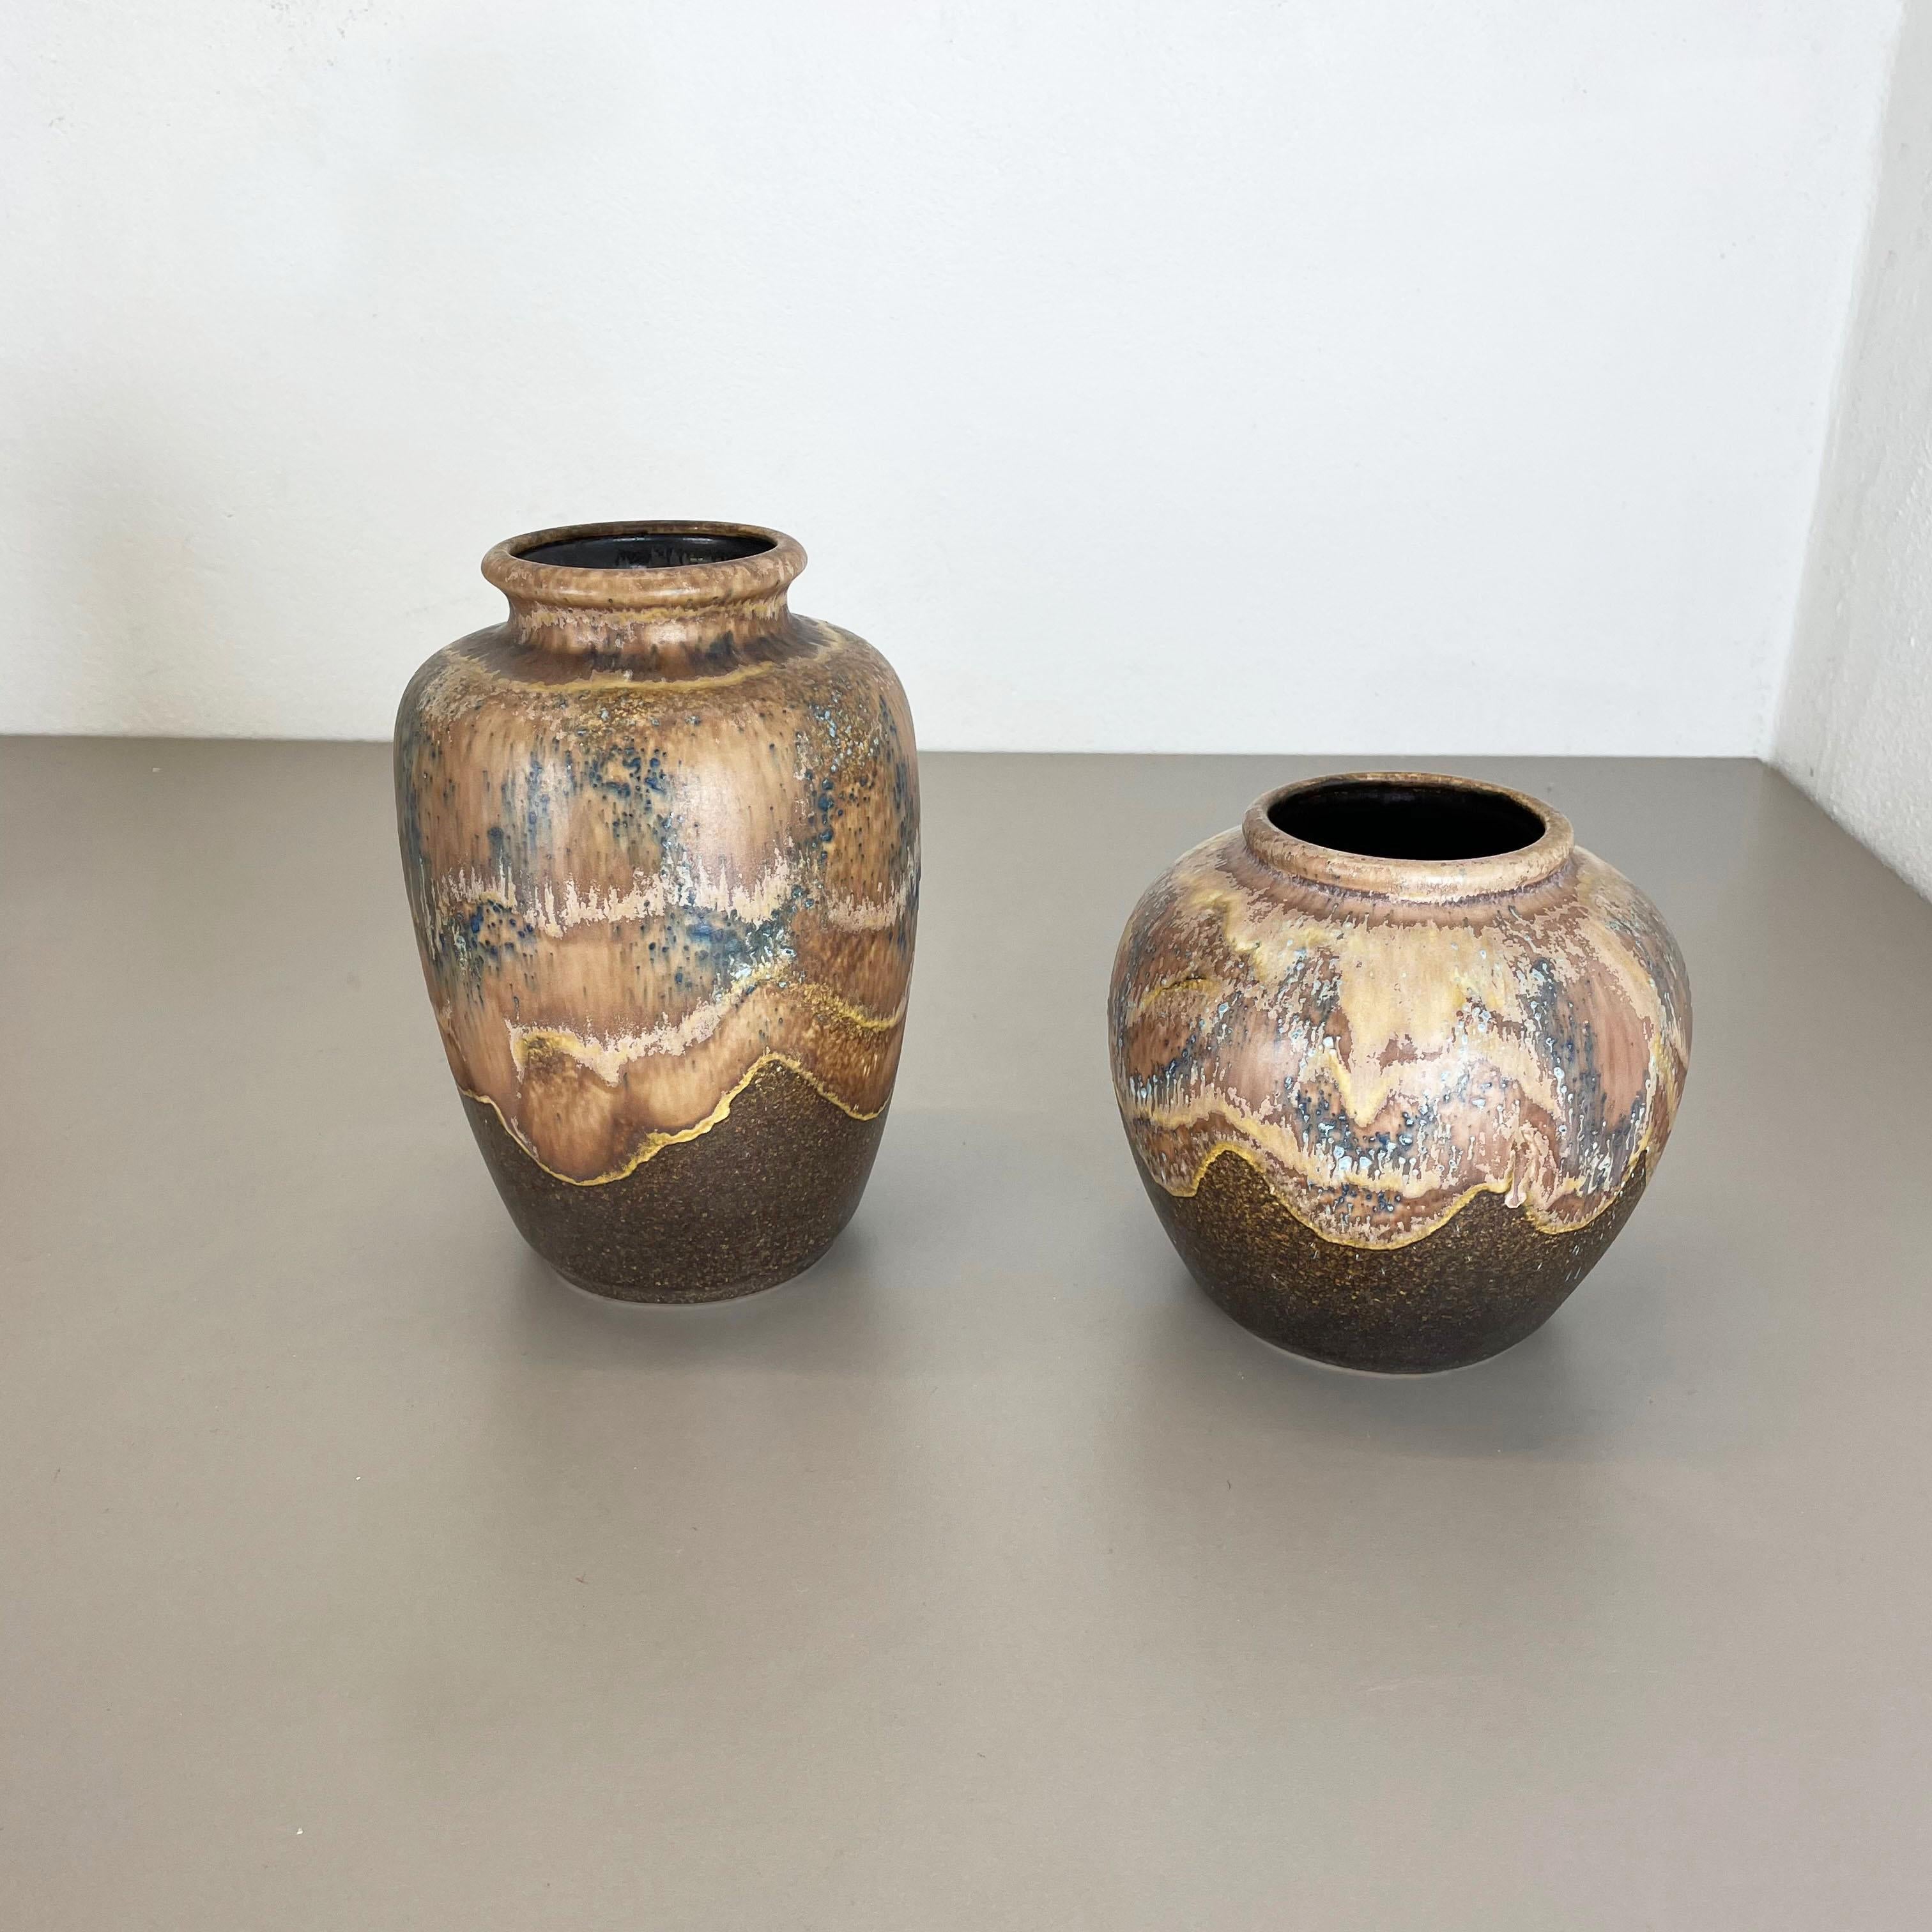 Article:

Pottery ceramic vase set of 2


Producer:

Dümler and Breiden, Germany


Decade:

1960s



Description:

Original vintage 1960s pottery ceramic vases in Germany. High quality German production with a nice abstract